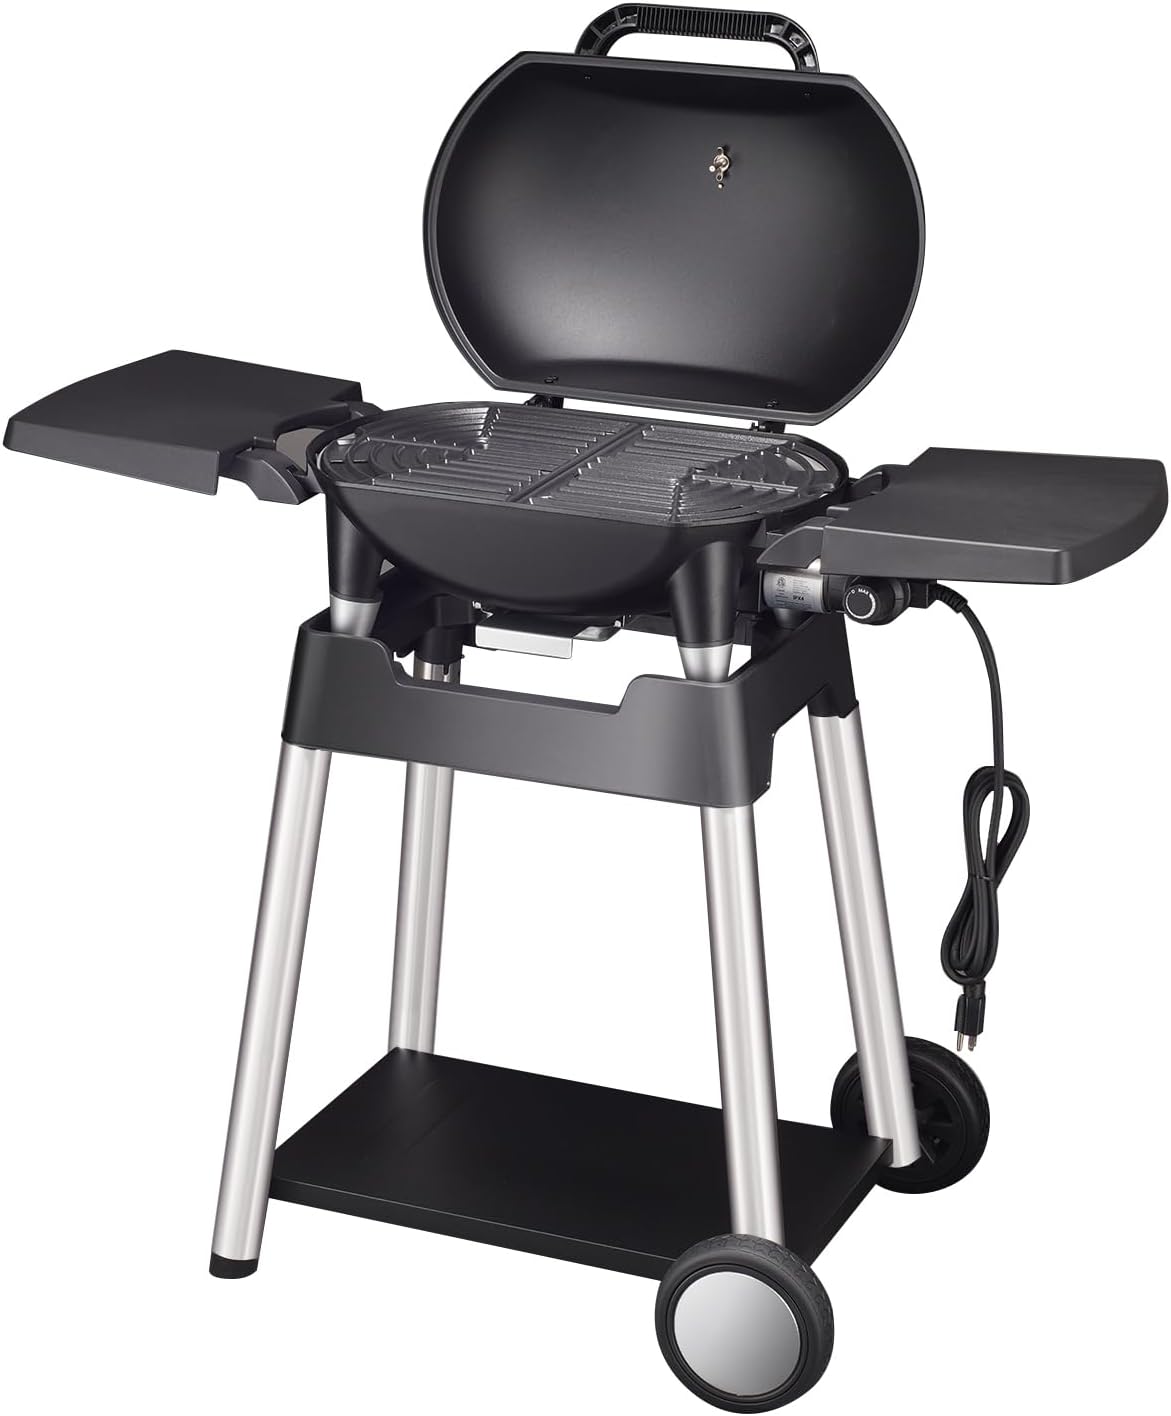 VANSTON Outdoor Electric Barbecue Grill  Smoker with Removable Stand, Cart Style, Black, 1500W Portable and Convenient Camping Grill for Party, Patio, Garden, Backyard, Balcony, Built-In Thermometer - VANSTON Outdoor Electric Barbecue Grill & Smoker Review